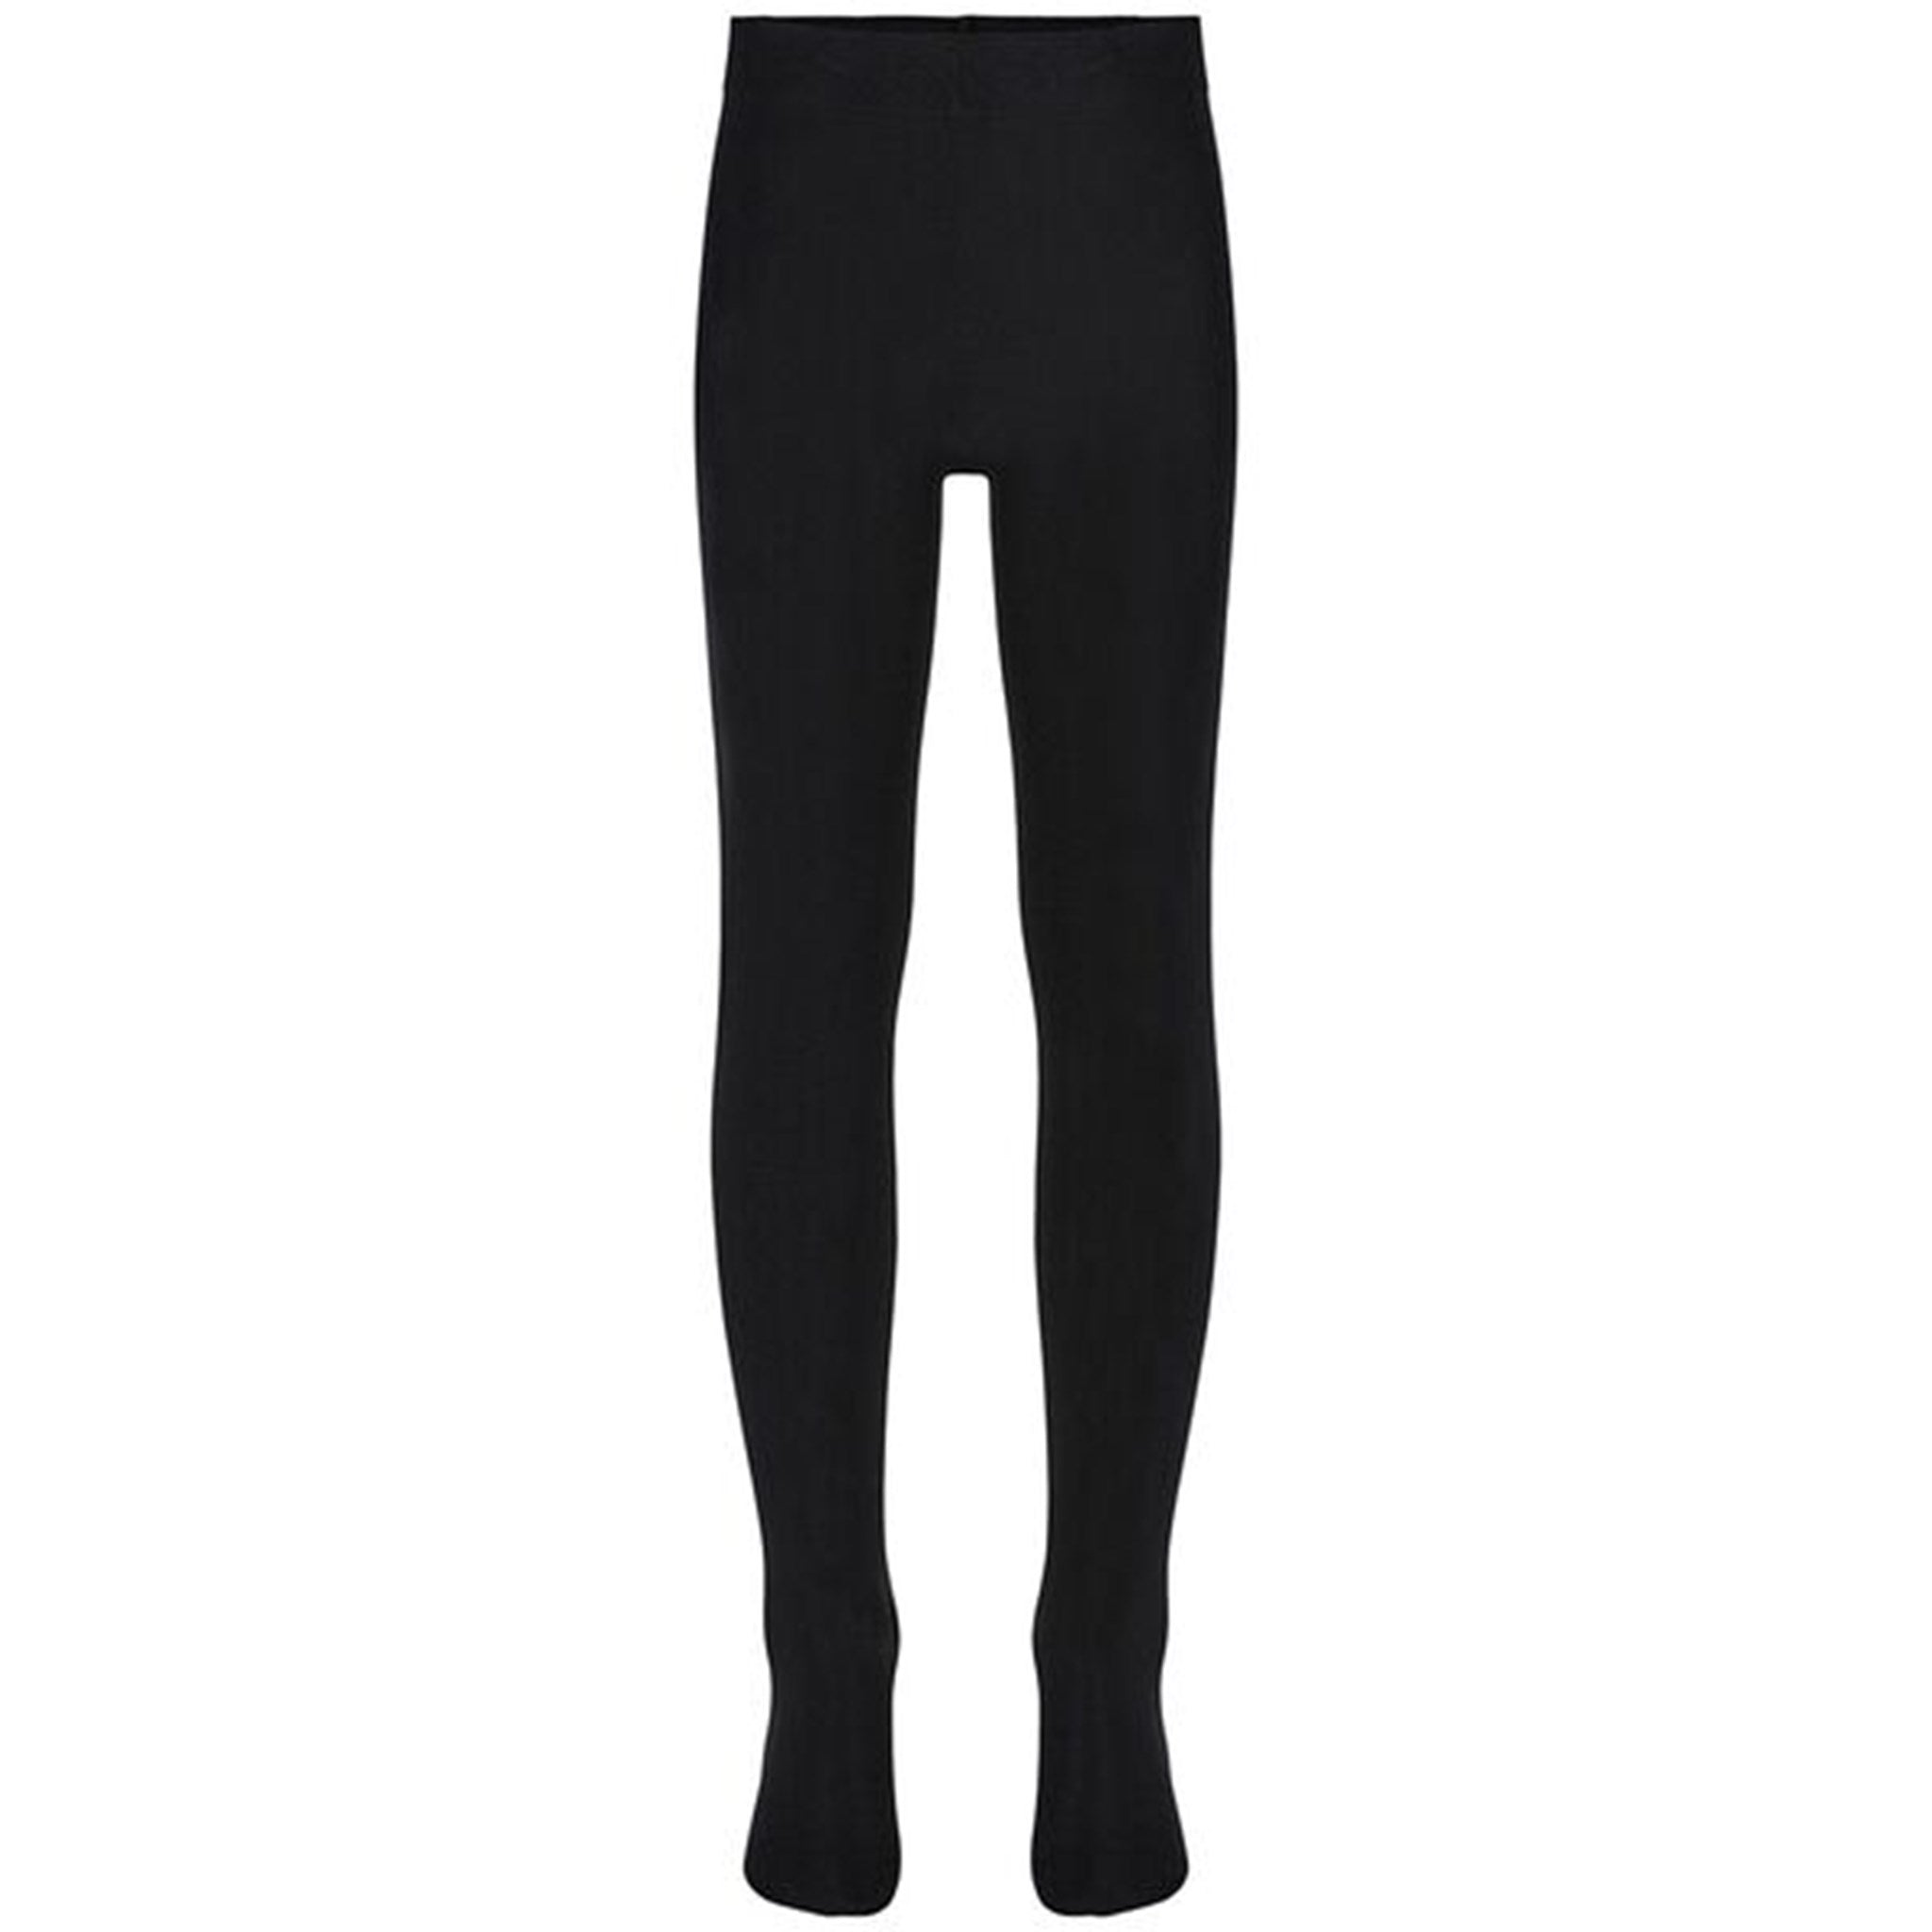 The New 2-pack Tights Black Glitter / Solid 2